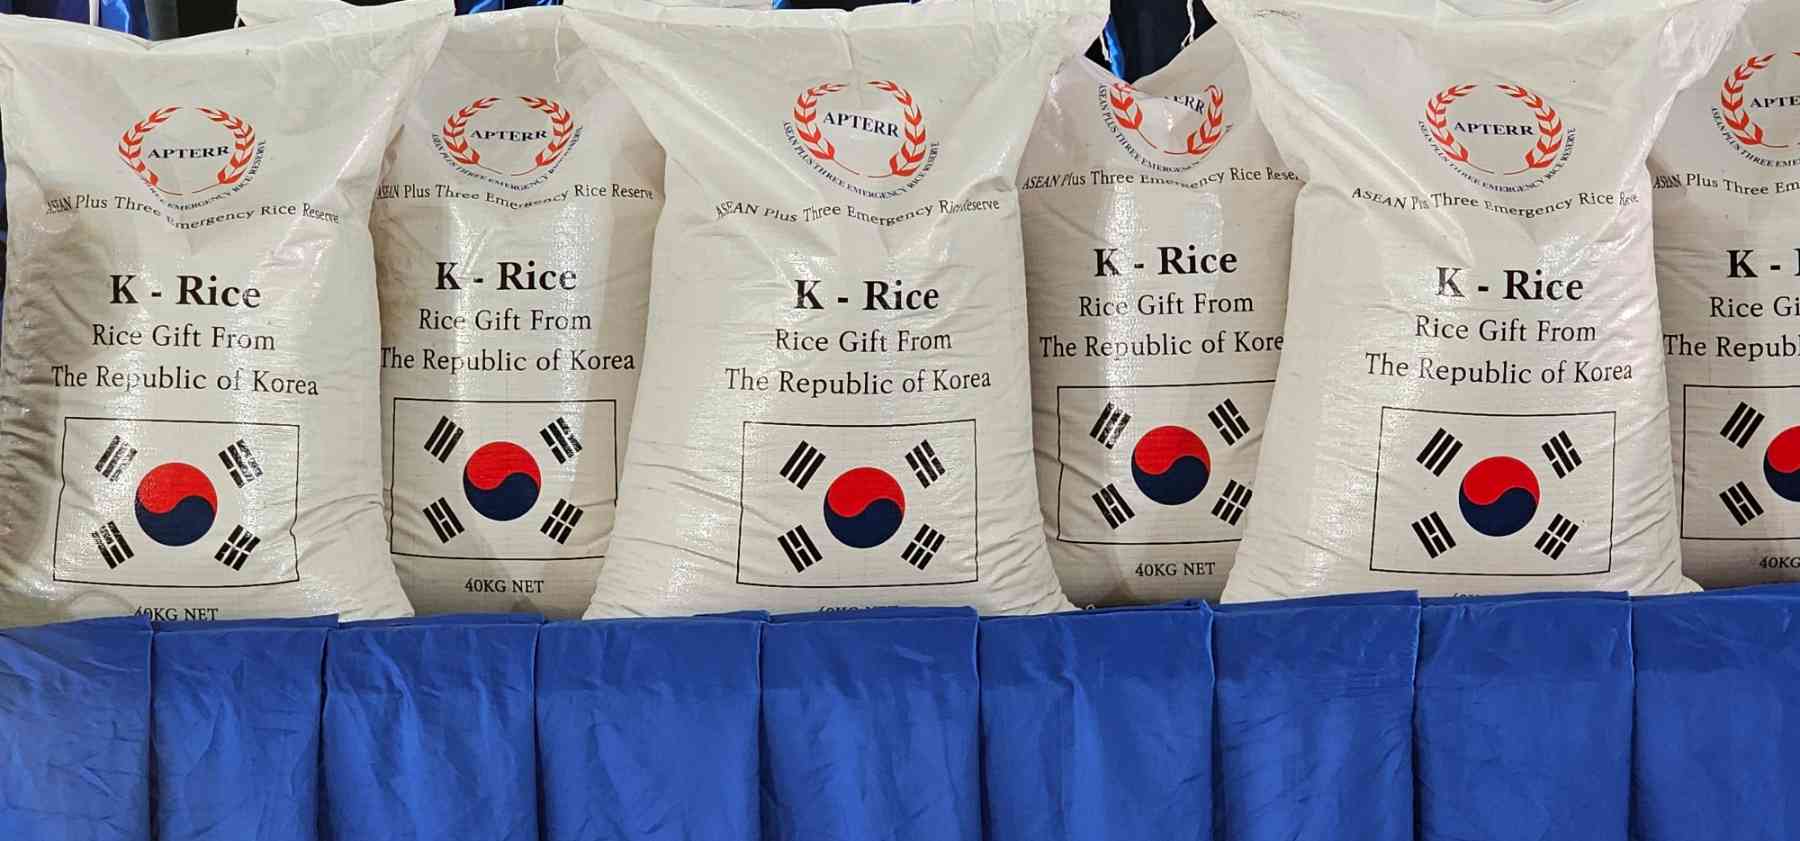 Republic of Korea donates 750 MT of rice for beneficiaries in Eastern Visayas and Mindanao